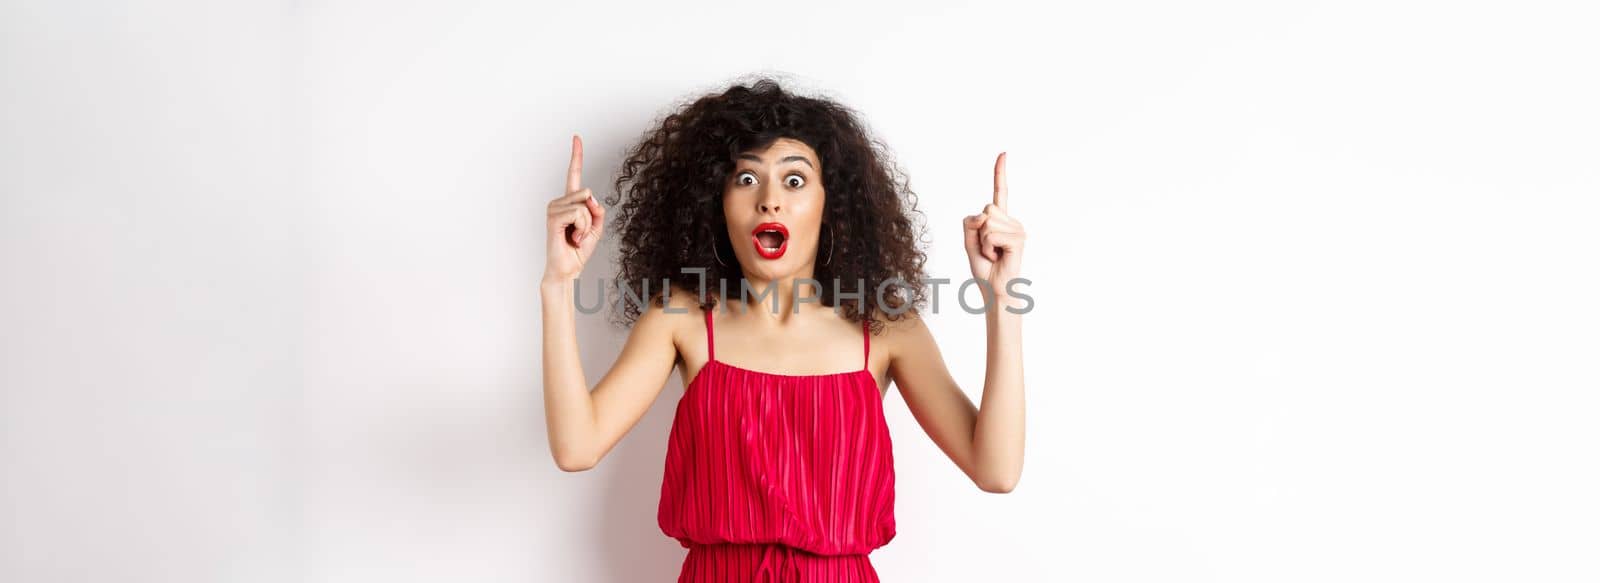 Impressed young woman with curly hair, wearing red dress, gasping and saying wow, pointing fingers up at logo, standing over white background.